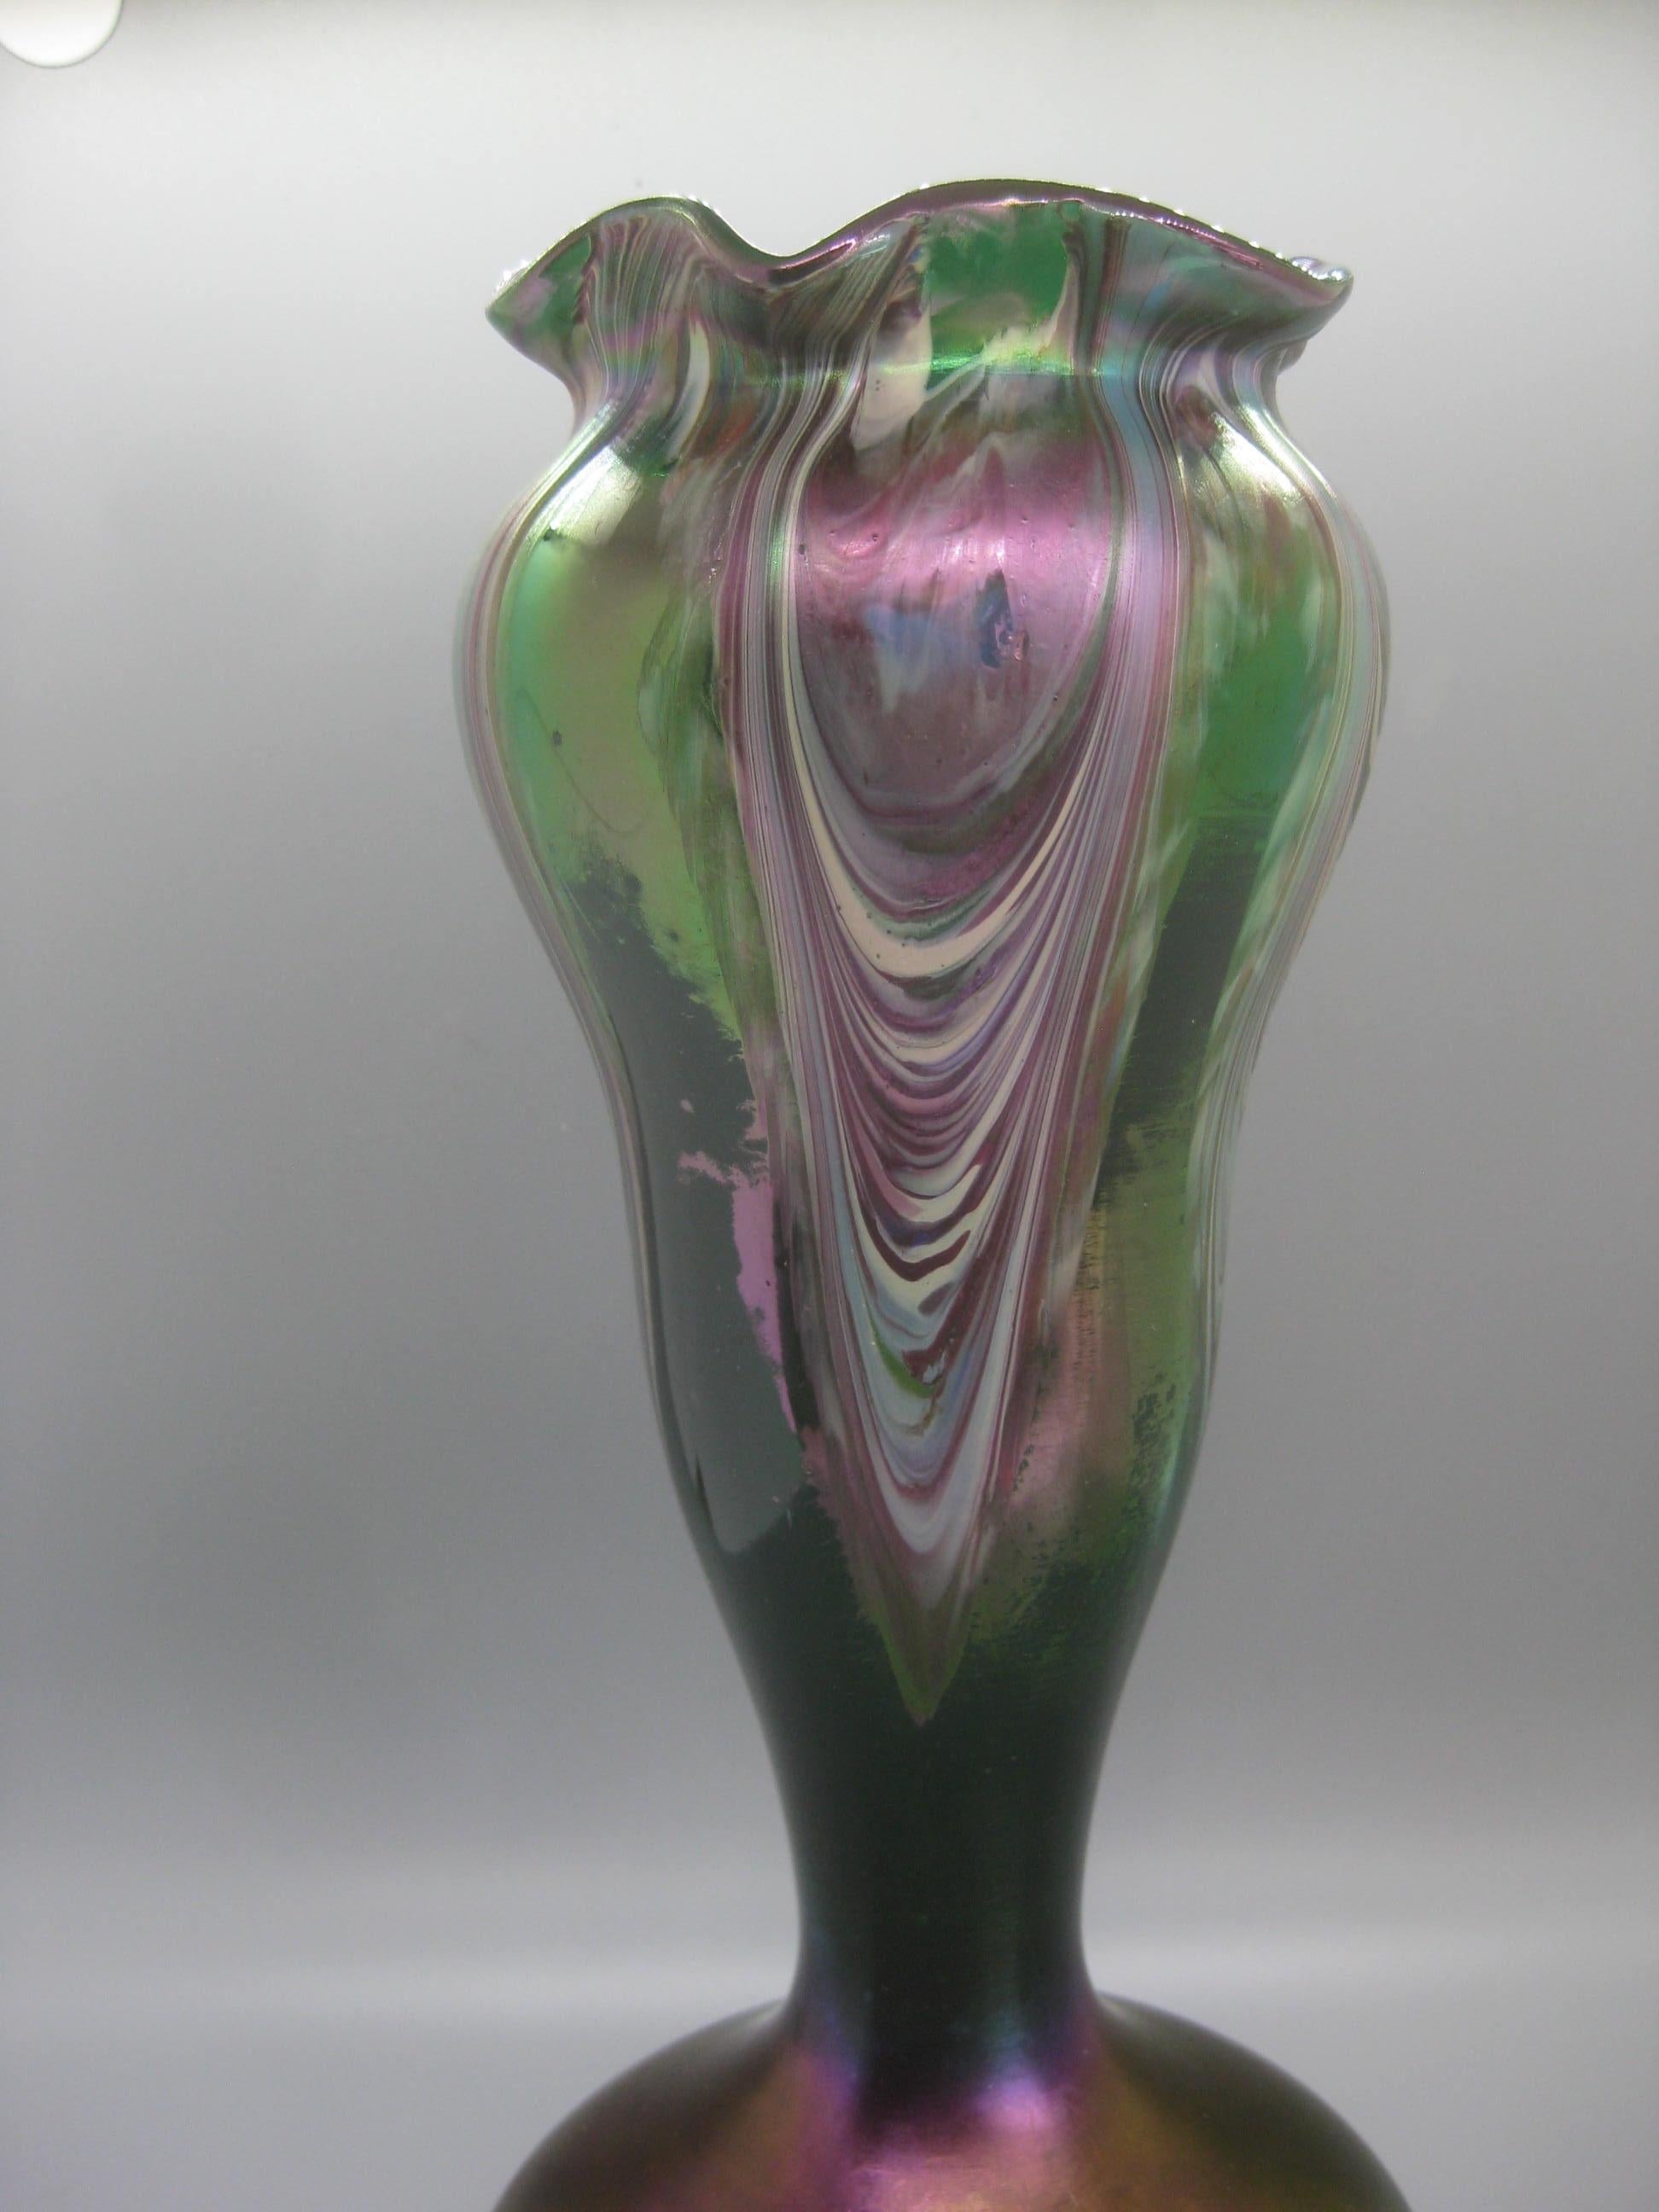 Stunning Art Nouveau Czech Bohemian iridescent pulled feather art glass vase by Josef Rindskopf, circa early 1900s. The vase has wonderful color and design. Green clear glass body with an opaque pulled feather design. Handmade and has a polished